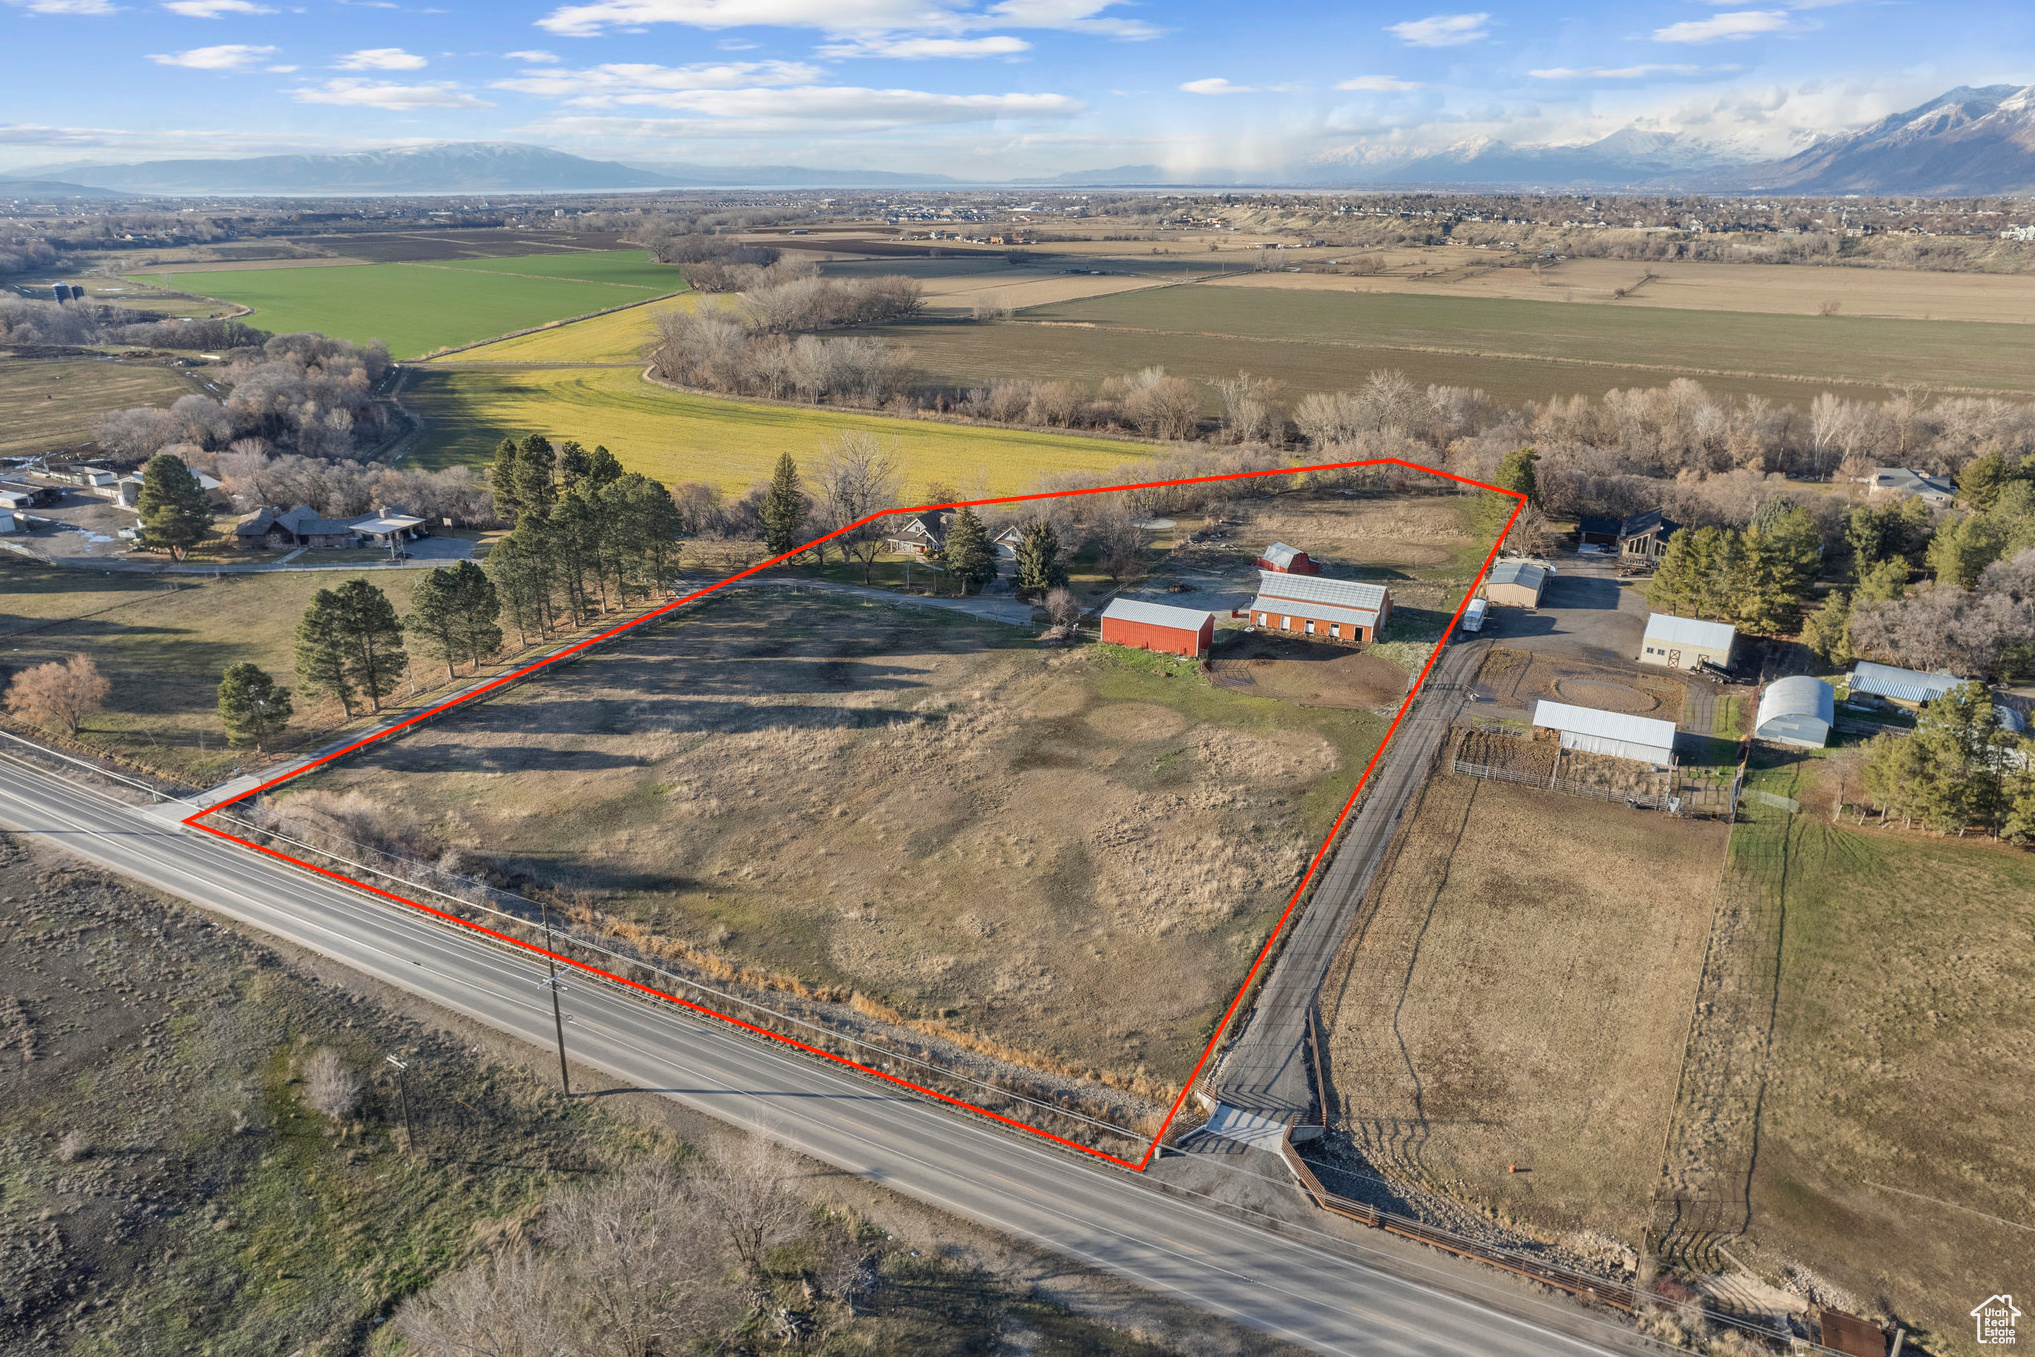 Birds eye view of property with a rural view and a mountain view looking to the northwest.